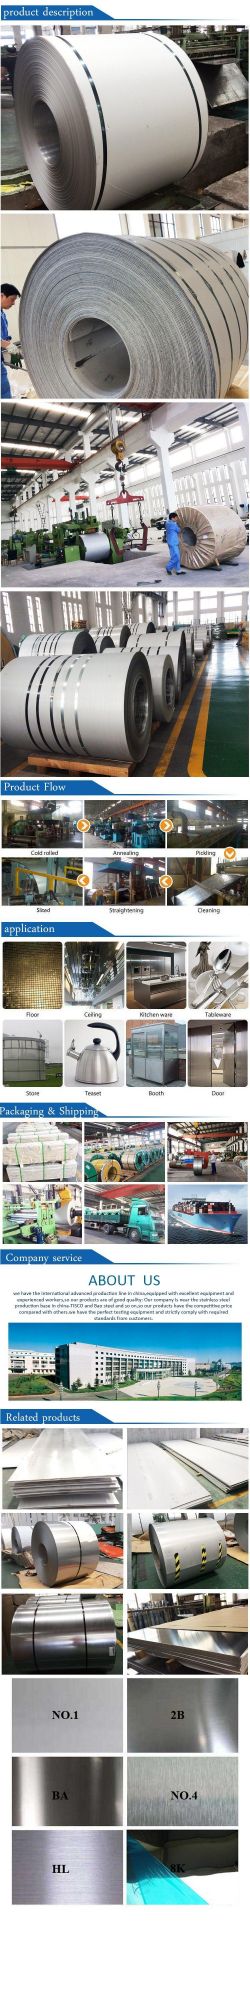 Stainless Steel 201 304 316 409 Plate/Sheet/Coil/Strip/Hot Dipped Galvanized Steel Coil Carbon Steel Hot Rolled Steel Coil Made in China with Best Quality